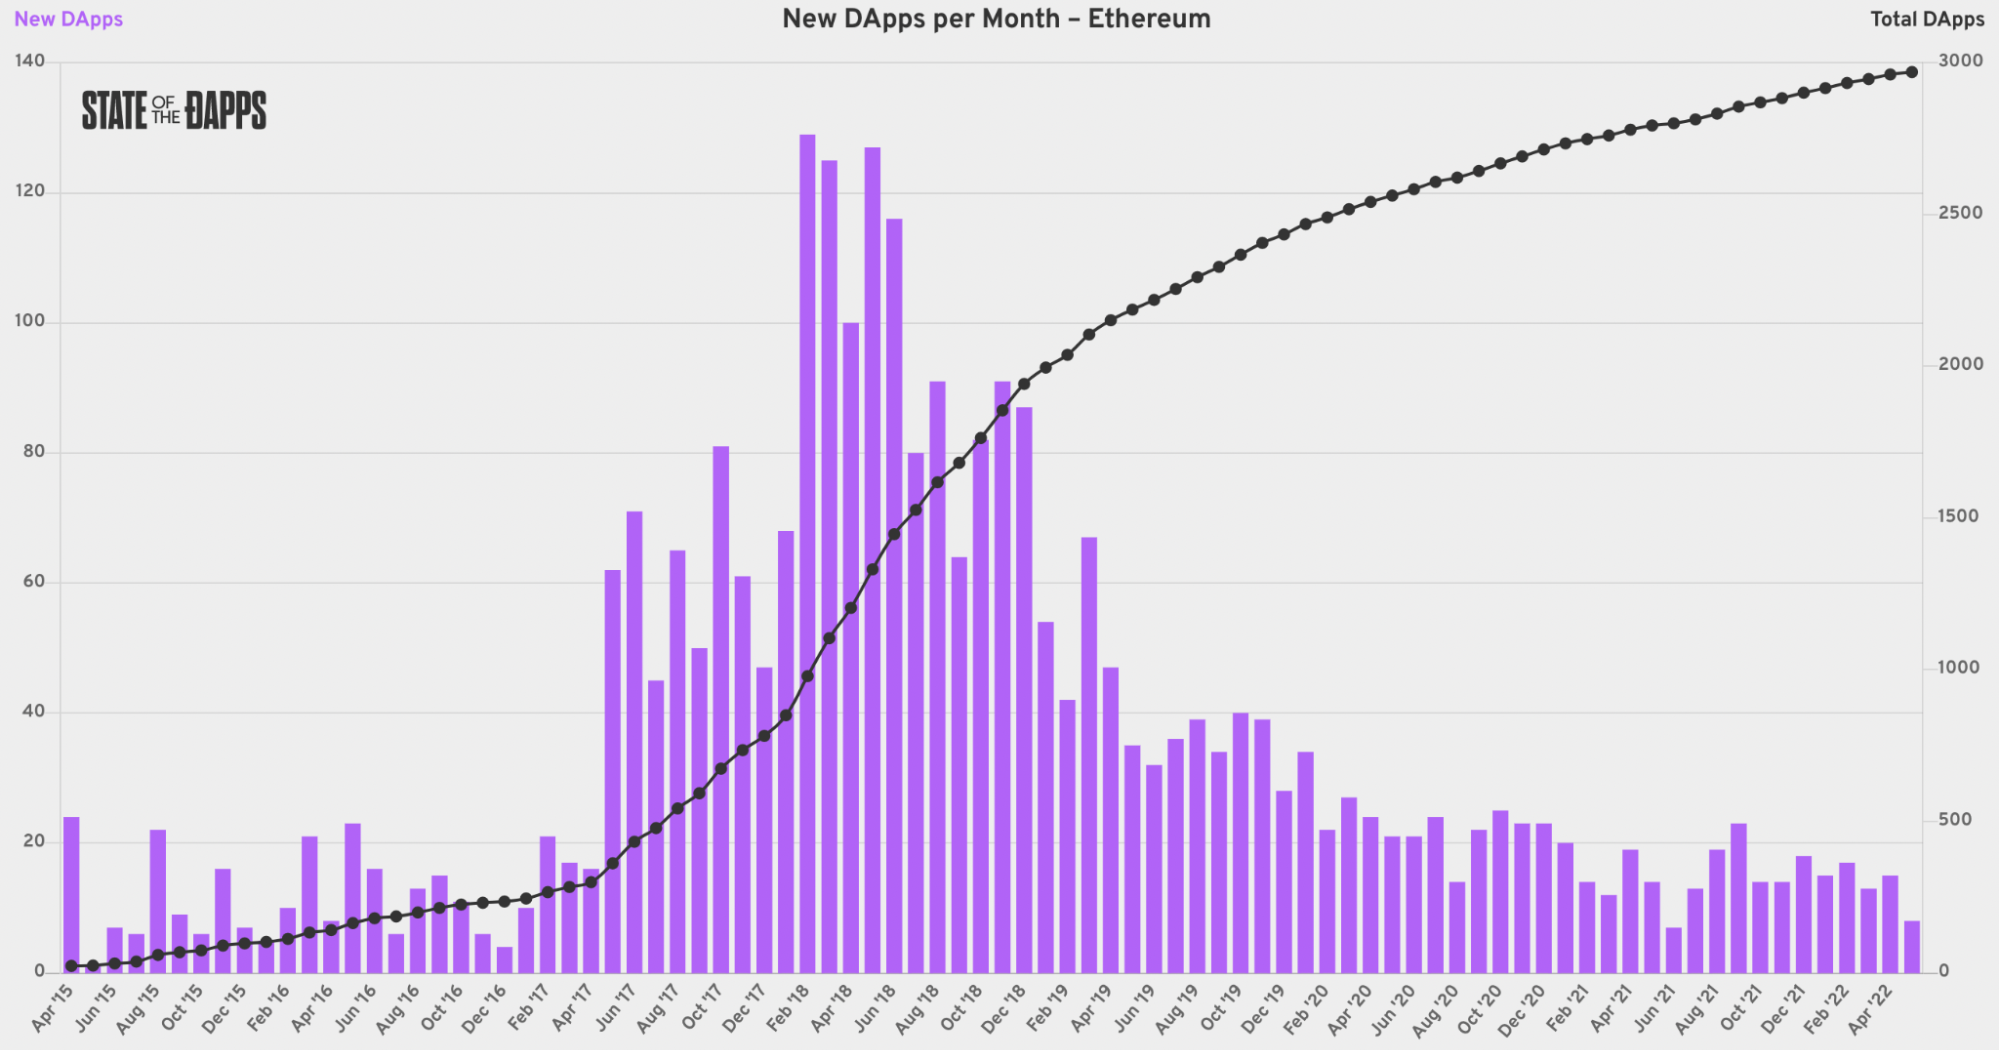 Chart illustrating new DApps created per month